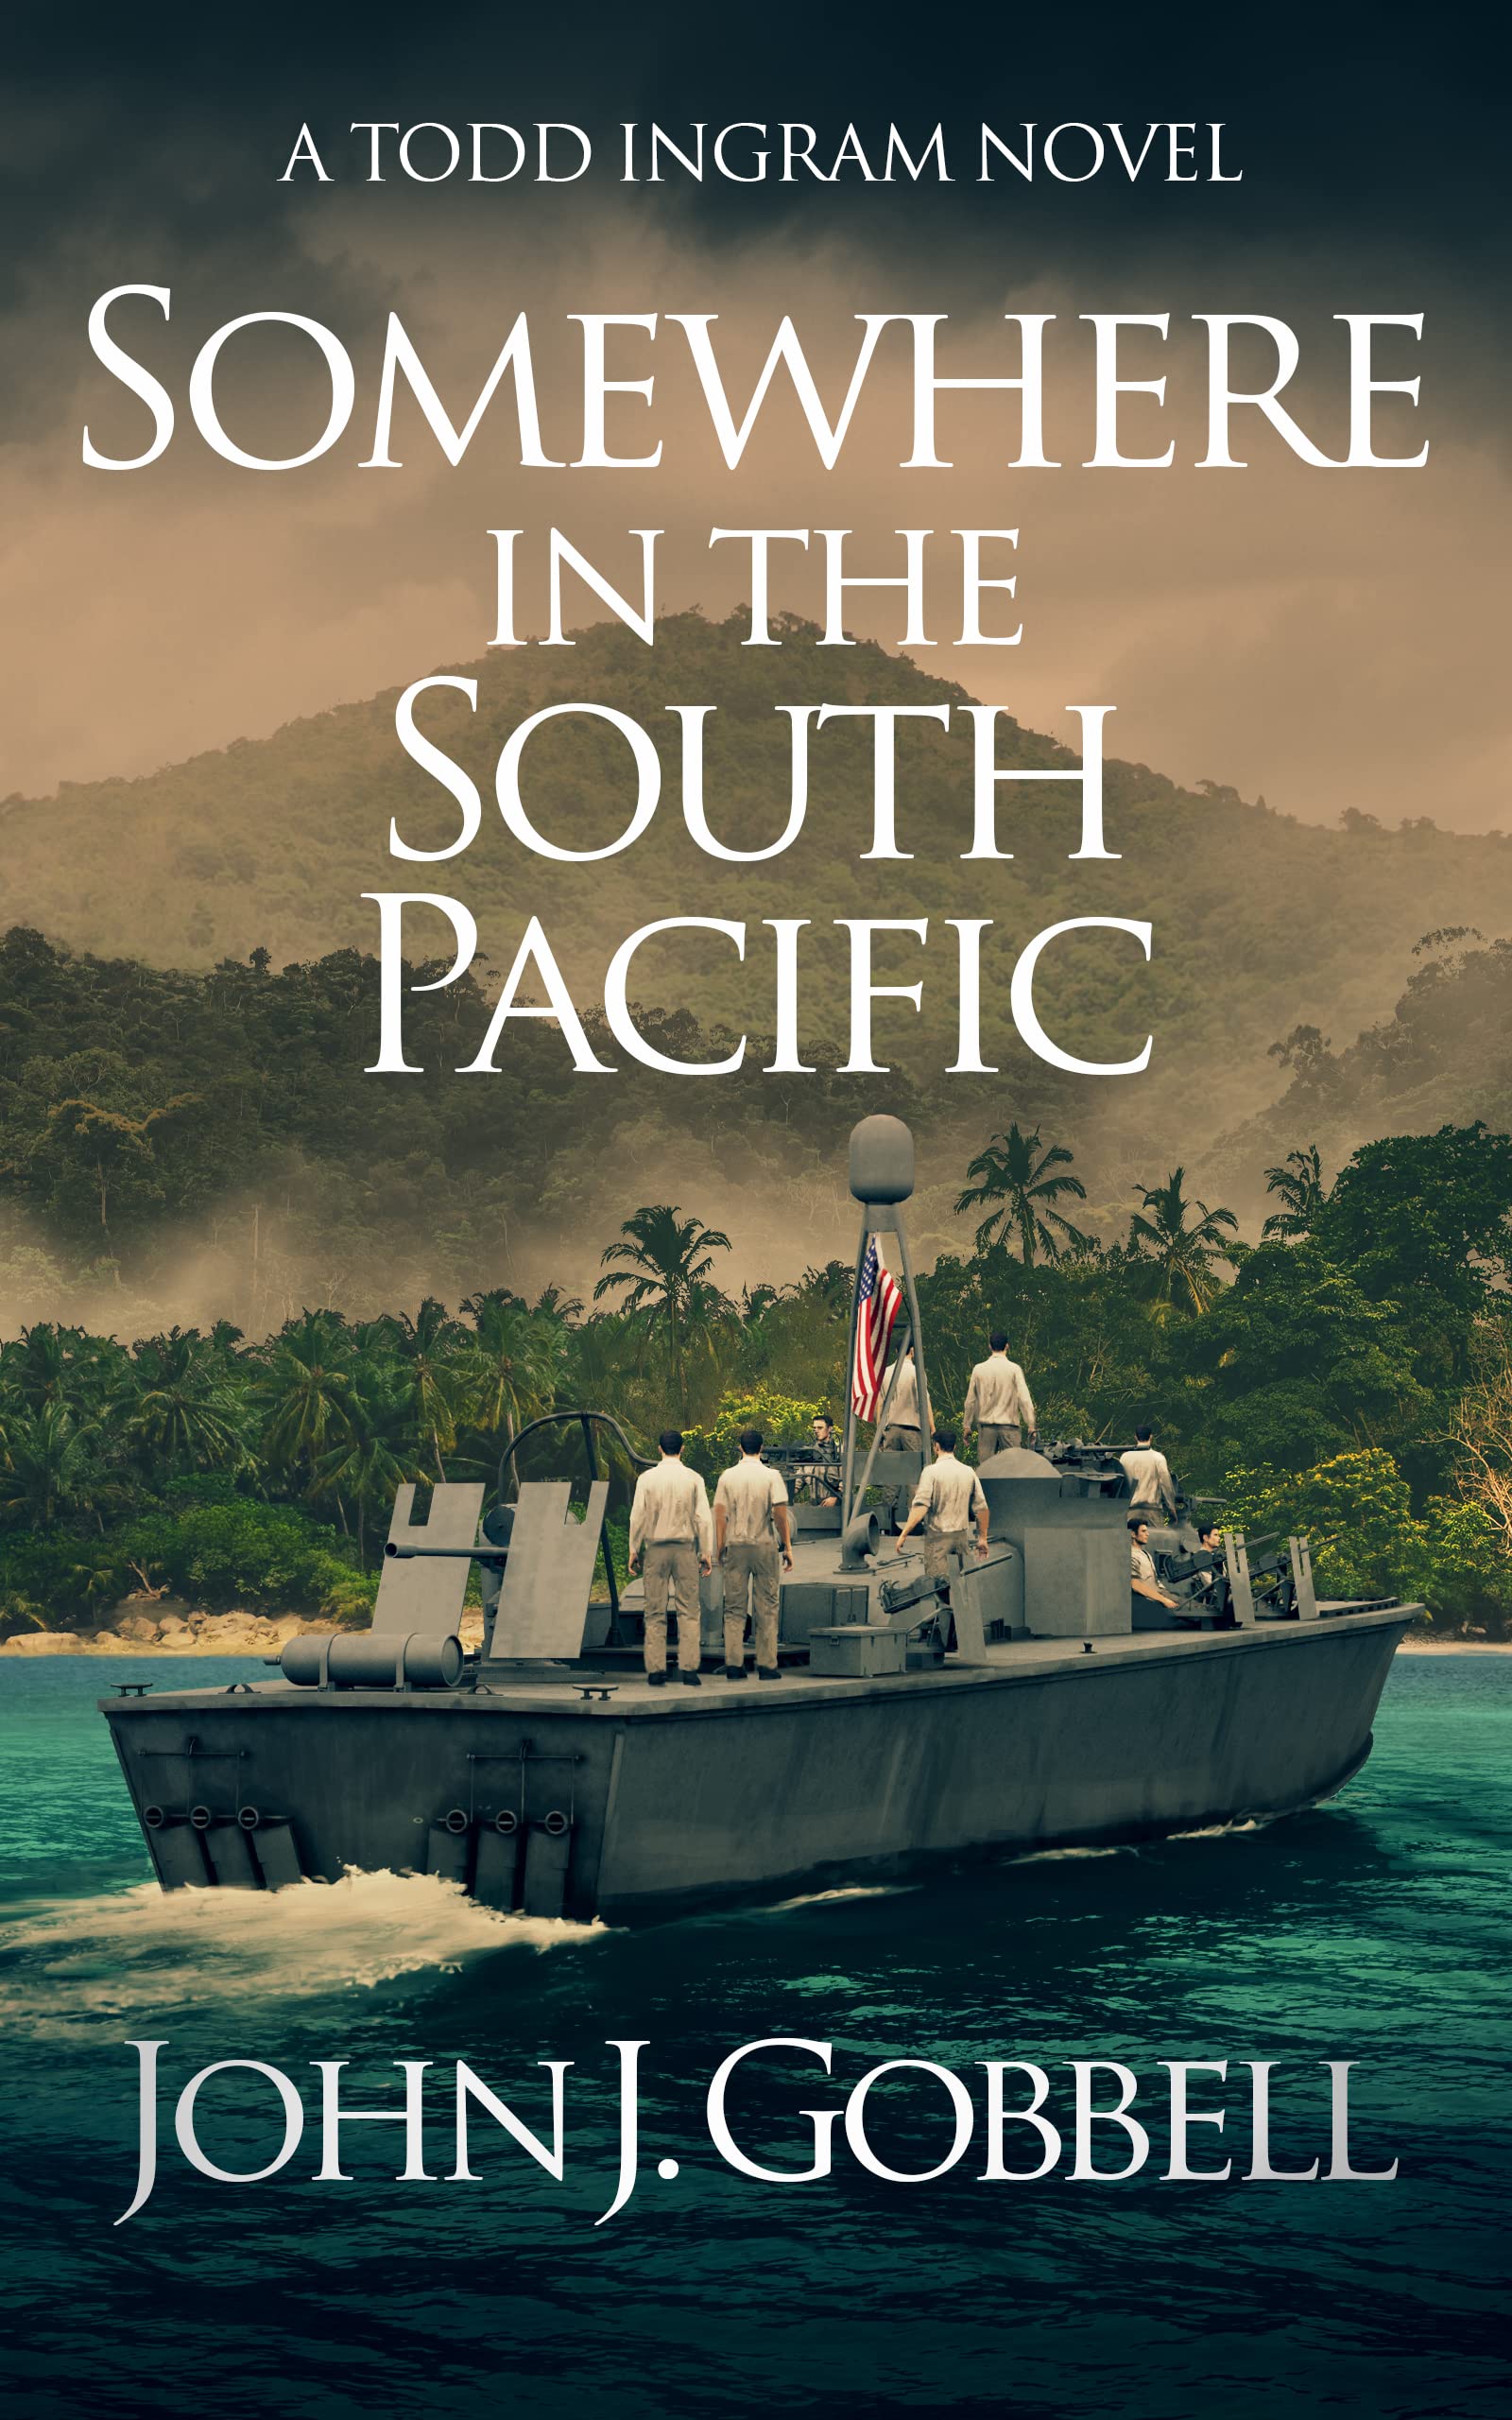 Somewhere in the South Pacific (The Todd Ingram Series Book 7)